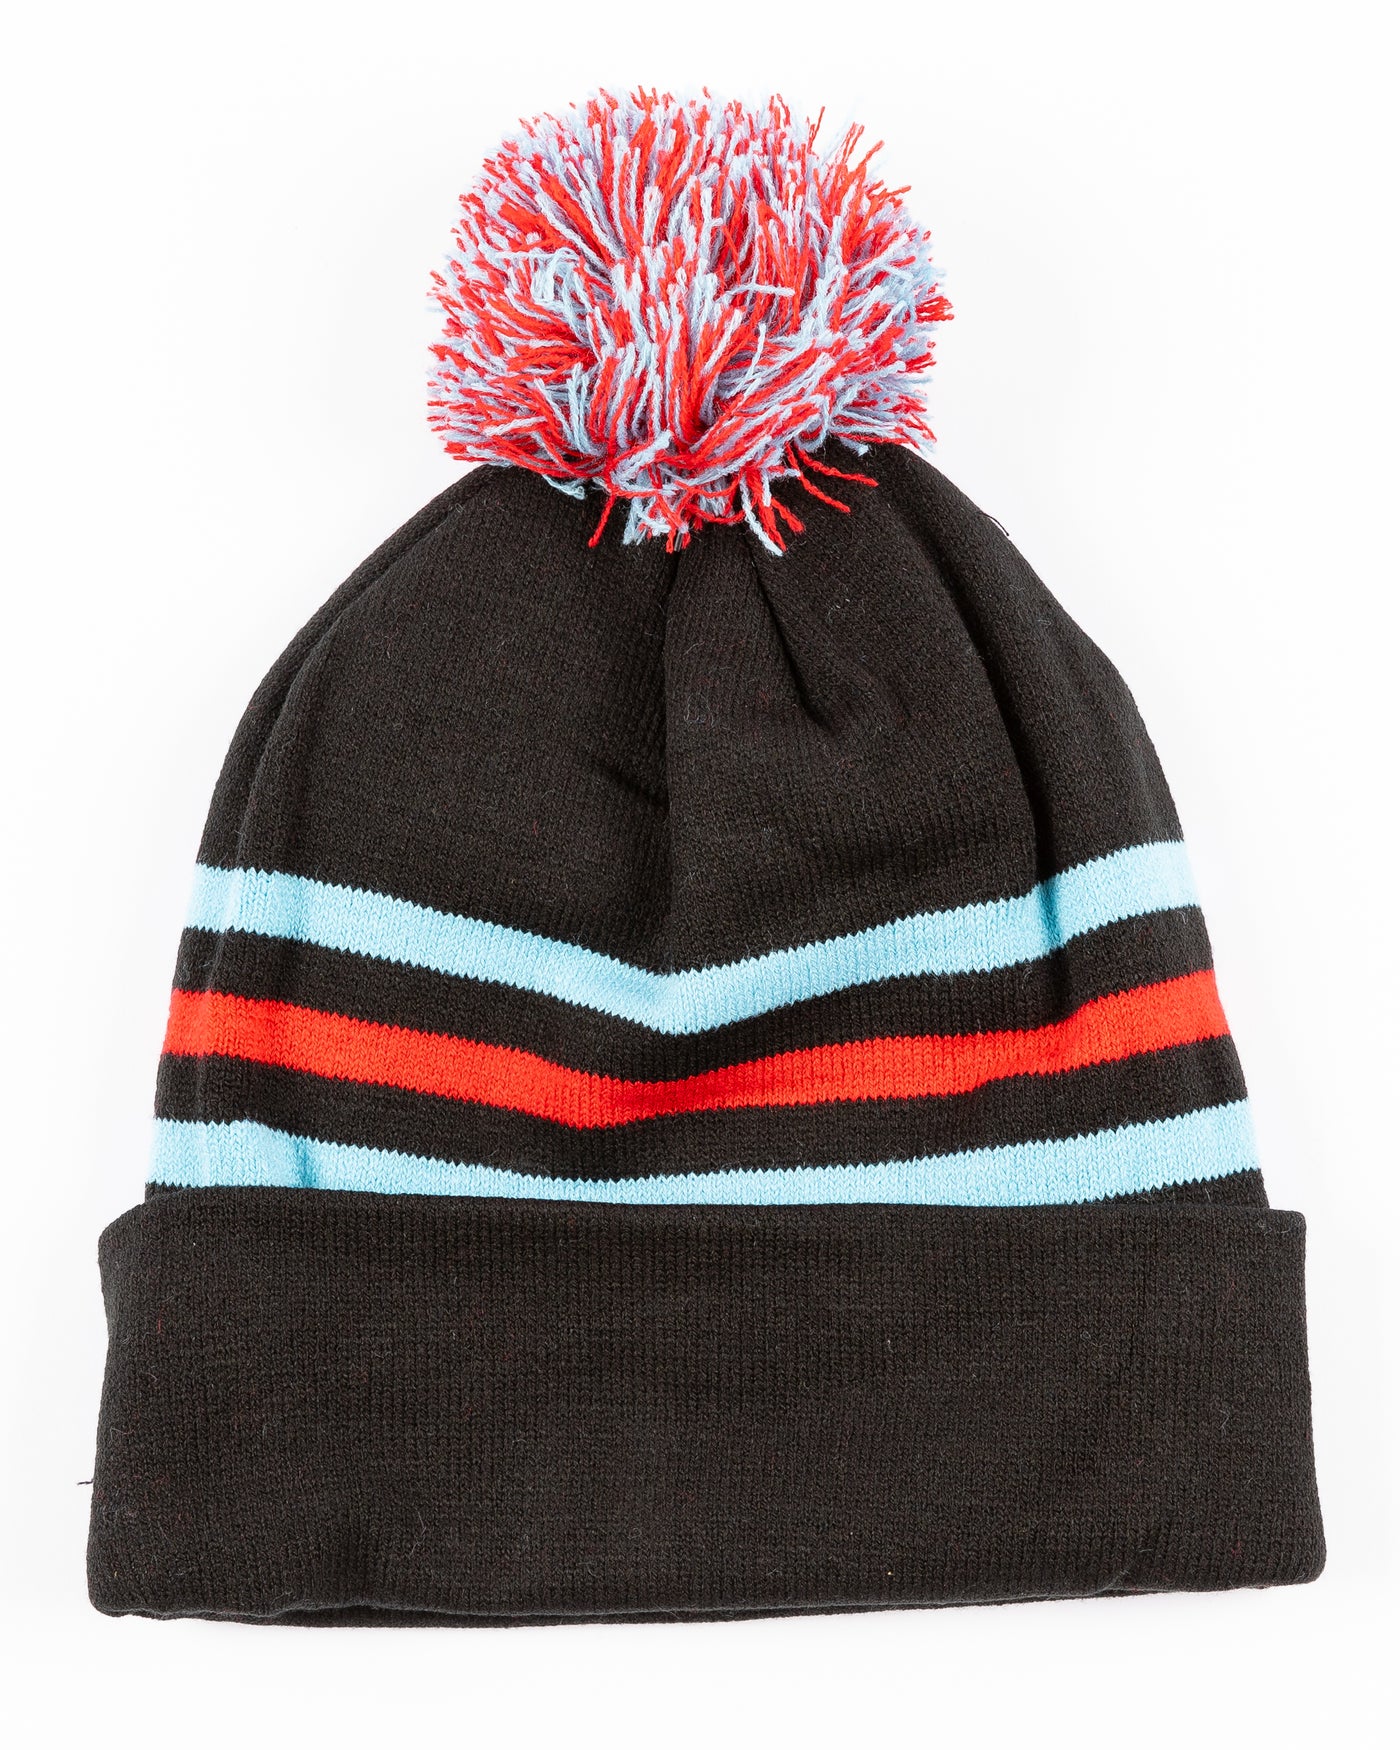 black knit hat with Chicago Blackhawks secondary logo and Chicago flag inspired accents - back lay flat